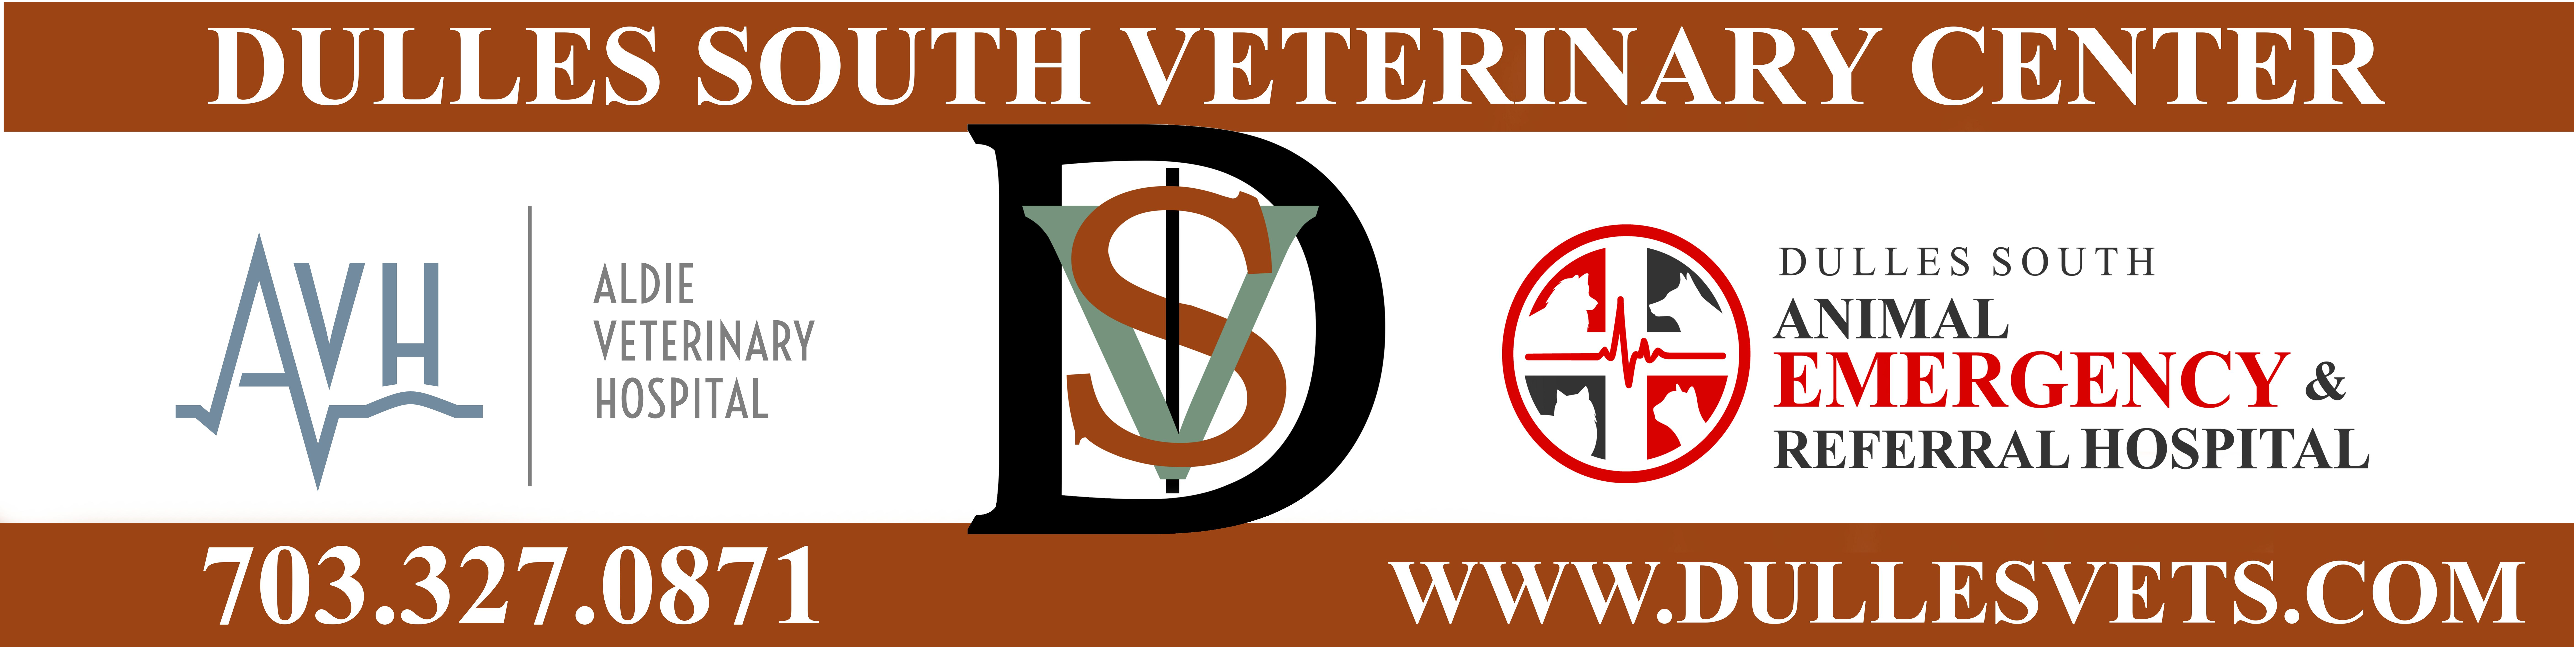 Dulles South Emergency Veterinary Center